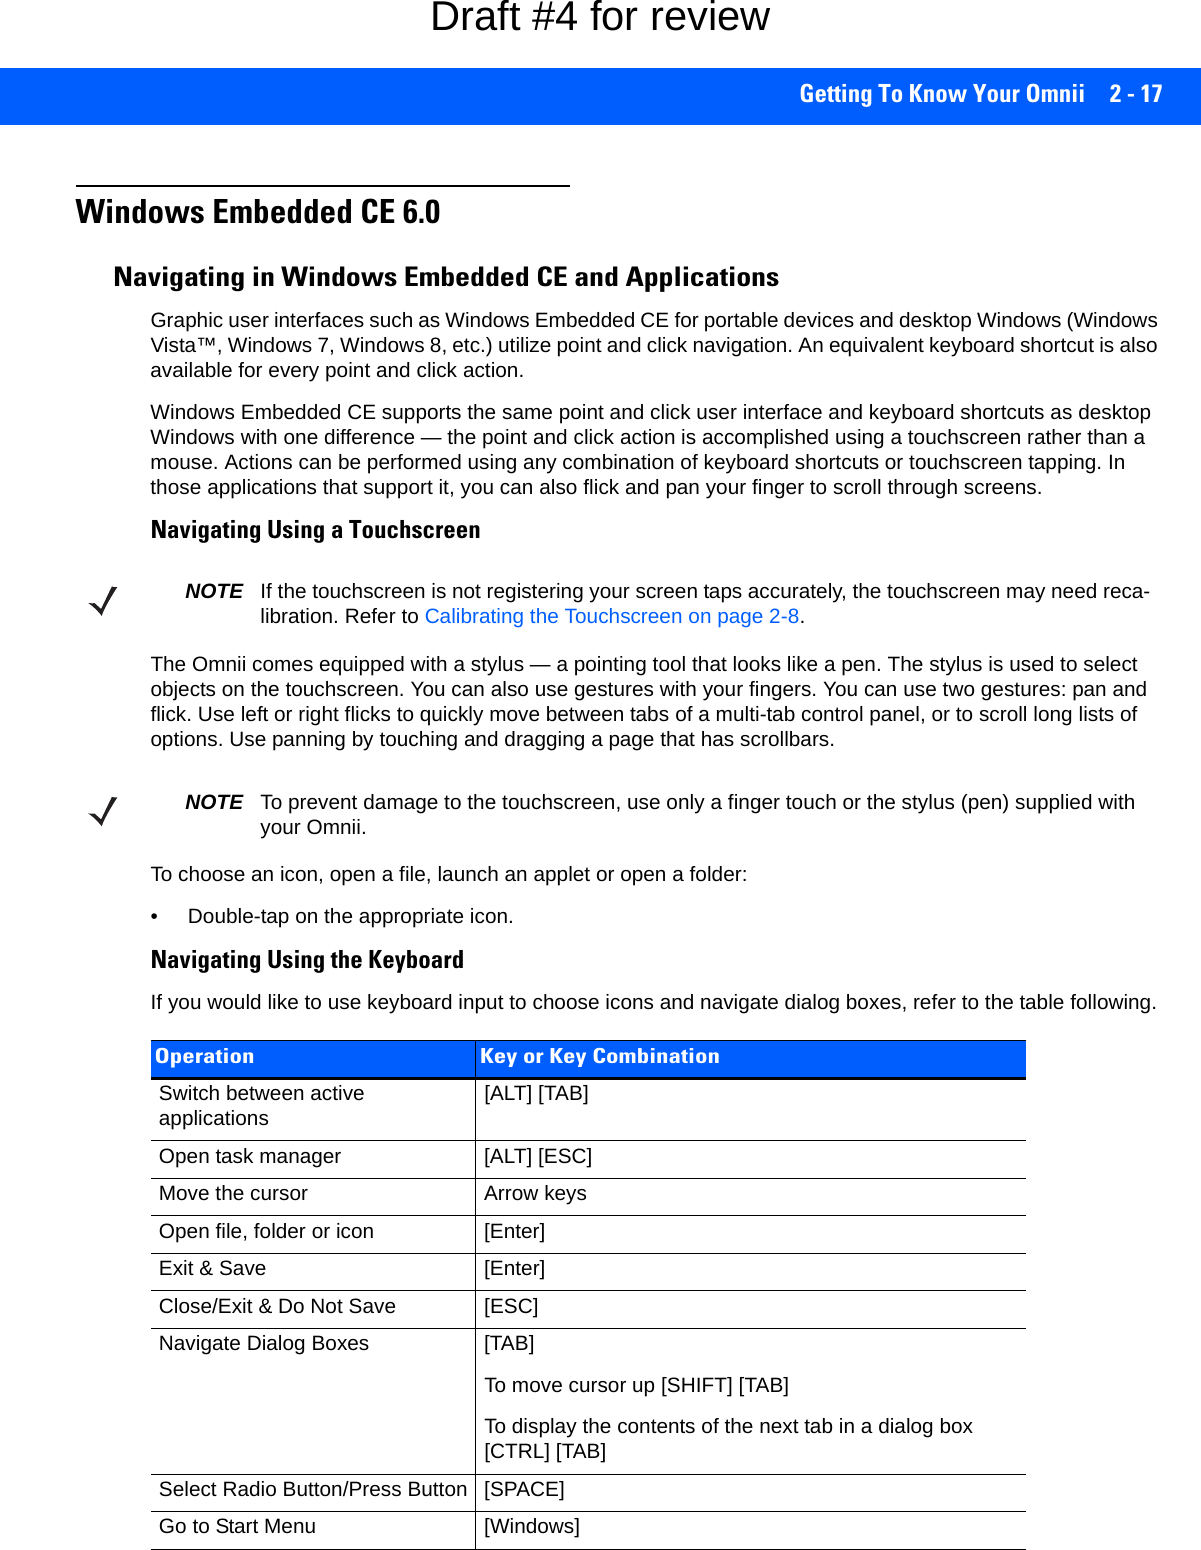 Getting To Know Your Omnii 2 - 17Windows Embedded CE 6.0Navigating in Windows Embedded CE and ApplicationsGraphic user interfaces such as Windows Embedded CE for portable devices and desktop Windows (Windows Vista™, Windows 7, Windows 8, etc.) utilize point and click navigation. An equivalent keyboard shortcut is also available for every point and click action.Windows Embedded CE supports the same point and click user interface and keyboard shortcuts as desktop Windows with one difference — the point and click action is accomplished using a touchscreen rather than a mouse. Actions can be performed using any combination of keyboard shortcuts or touchscreen tapping. In those applications that support it, you can also flick and pan your finger to scroll through screens.Navigating Using a TouchscreenThe Omnii comes equipped with a stylus — a pointing tool that looks like a pen. The stylus is used to select objects on the touchscreen. You can also use gestures with your fingers. You can use two gestures: pan and flick. Use left or right flicks to quickly move between tabs of a multi-tab control panel, or to scroll long lists of options. Use panning by touching and dragging a page that has scrollbars.To choose an icon, open a file, launch an applet or open a folder:• Double-tap on the appropriate icon.Navigating Using the KeyboardIf you would like to use keyboard input to choose icons and navigate dialog boxes, refer to the table following.NOTE If the touchscreen is not registering your screen taps accurately, the touchscreen may need reca-libration. Refer to Calibrating the Touchscreen on page 2-8.NOTE To prevent damage to the touchscreen, use only a finger touch or the stylus (pen) supplied with your Omnii.Operation Key or Key CombinationSwitch between active applications [ALT] [TAB]Open task manager [ALT] [ESC]Move the cursor Arrow keysOpen file, folder or icon [Enter]Exit &amp; Save [Enter]Close/Exit &amp; Do Not Save [ESC]Navigate Dialog Boxes [TAB]To move cursor up [SHIFT] [TAB]To display the contents of the next tab in a dialog box [CTRL] [TAB]Select Radio Button/Press Button [SPACE]Go to Start Menu [Windows]Draft #4 for review